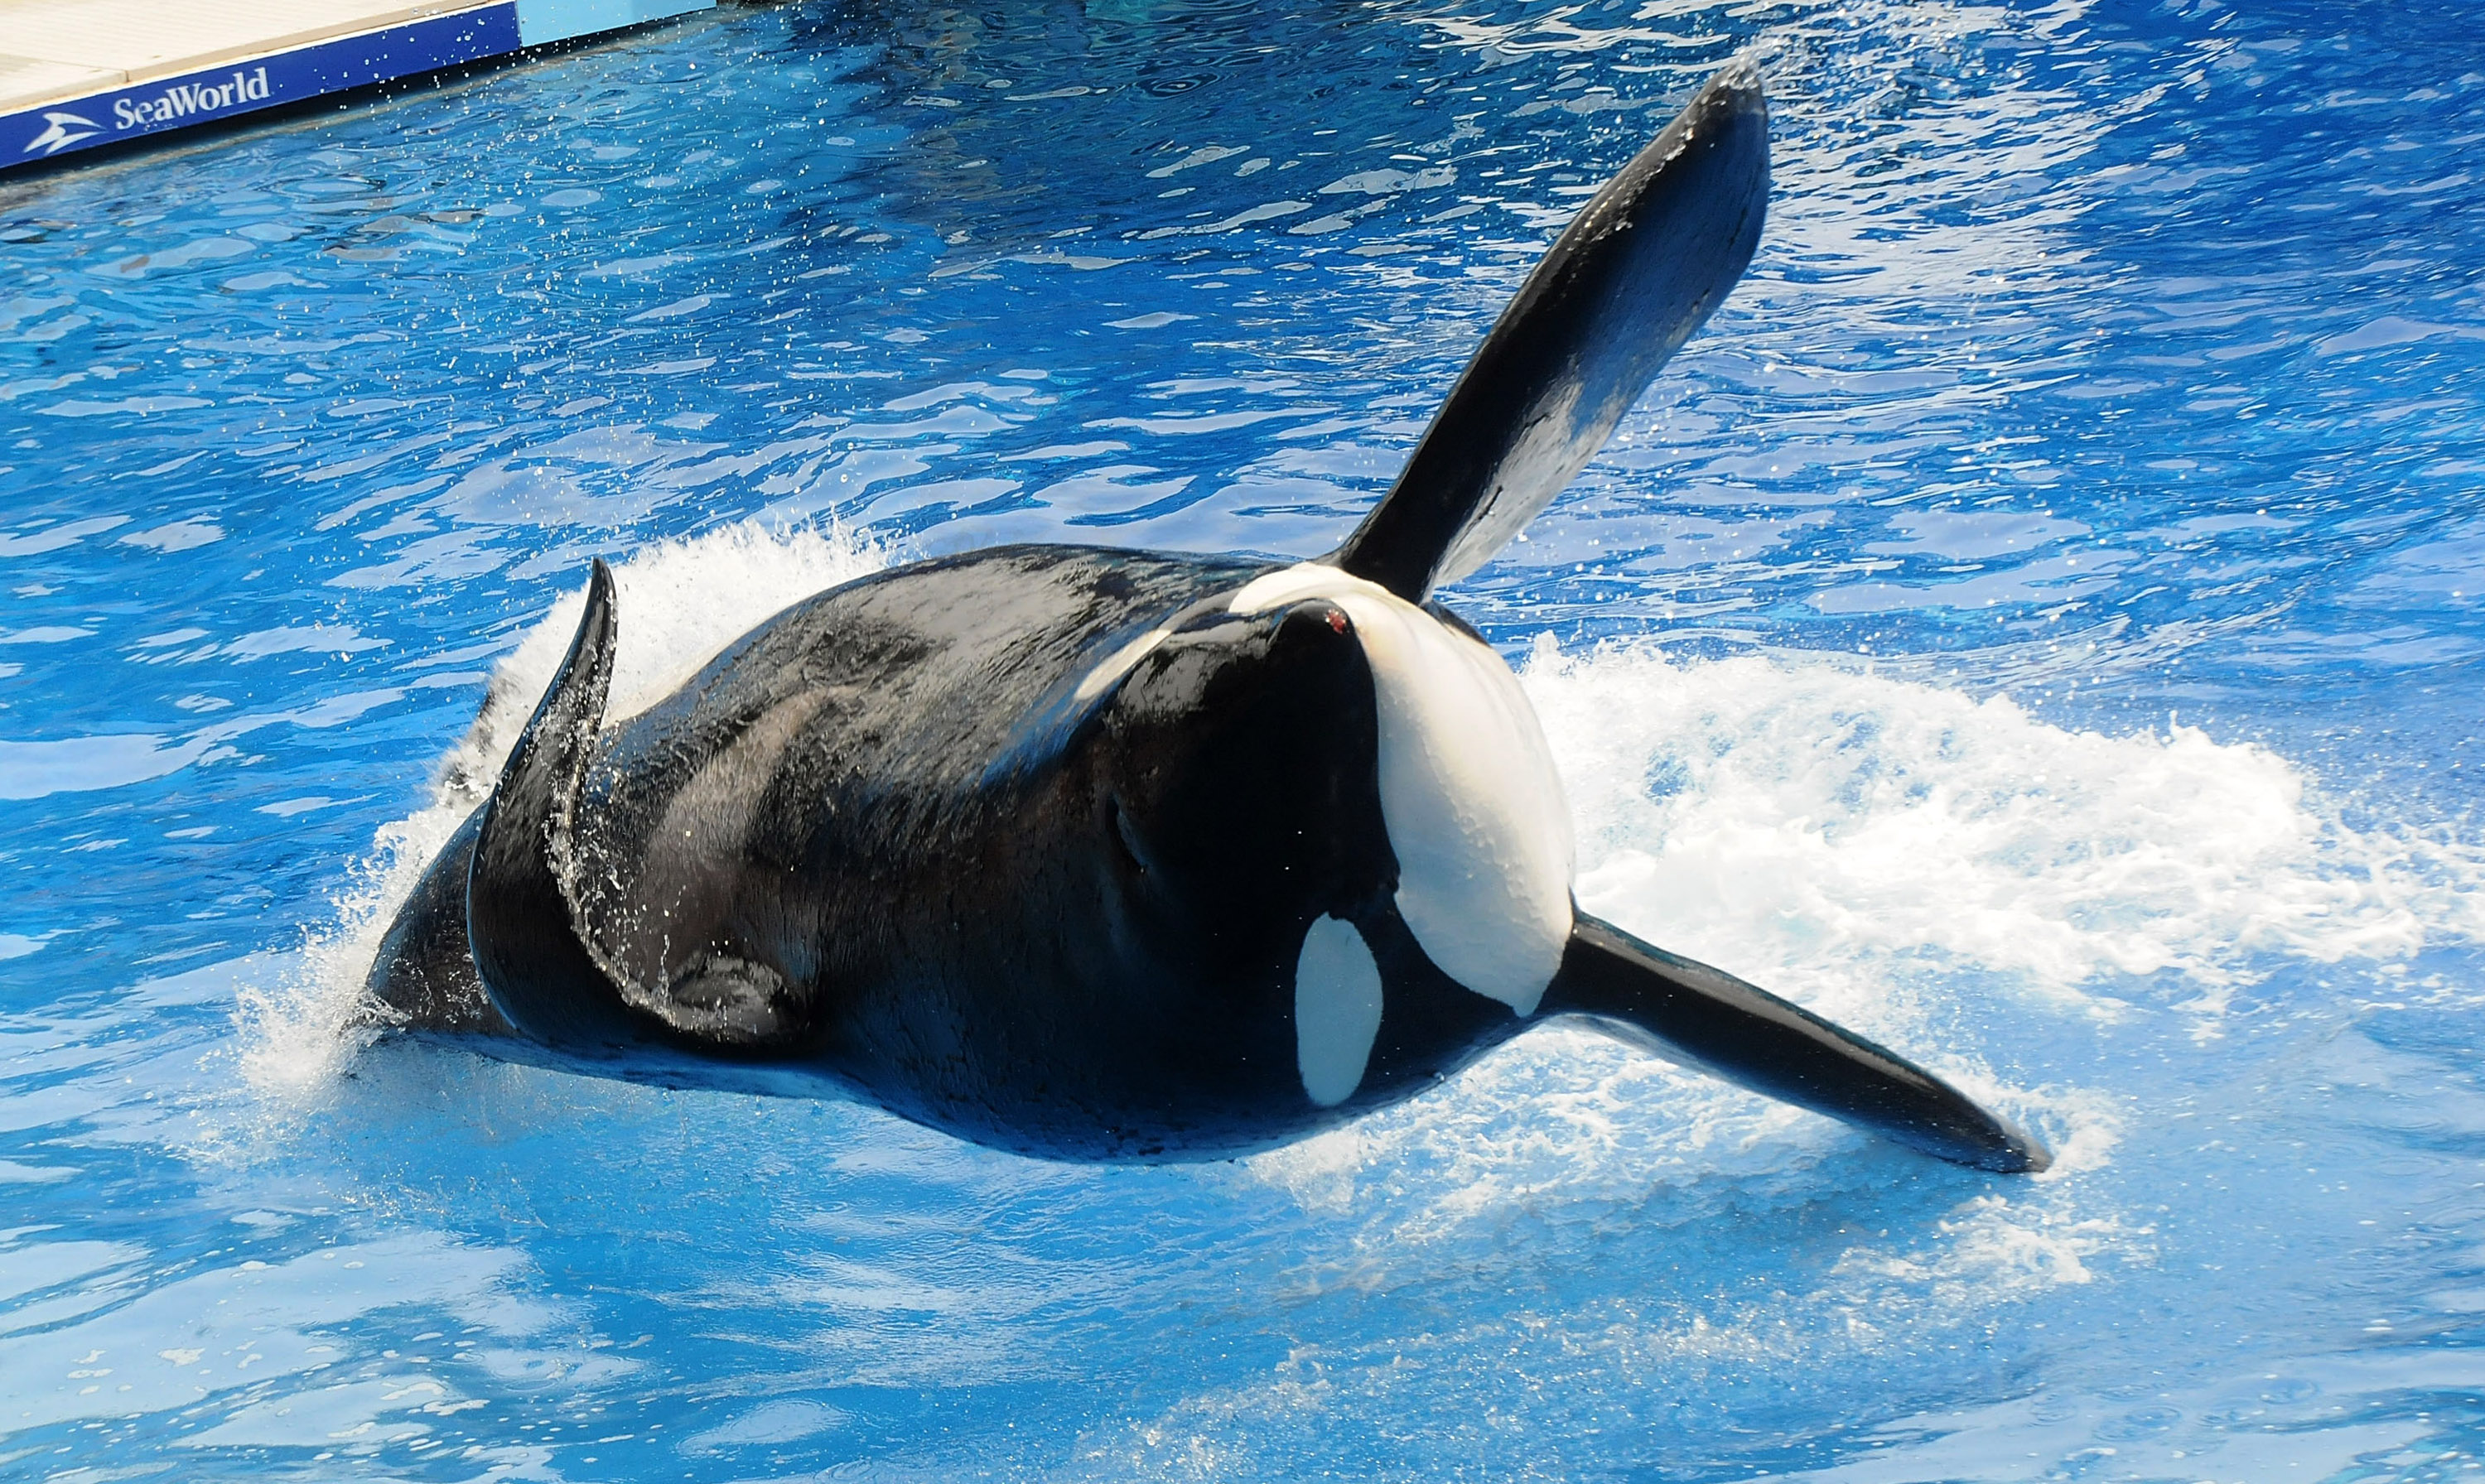 Killer whale "Tilikum" appears during its performance in its show "Believe" at Sea World in Orlando, Florida, on March 30, 2011. (Gerardo Mora—Getty Images)